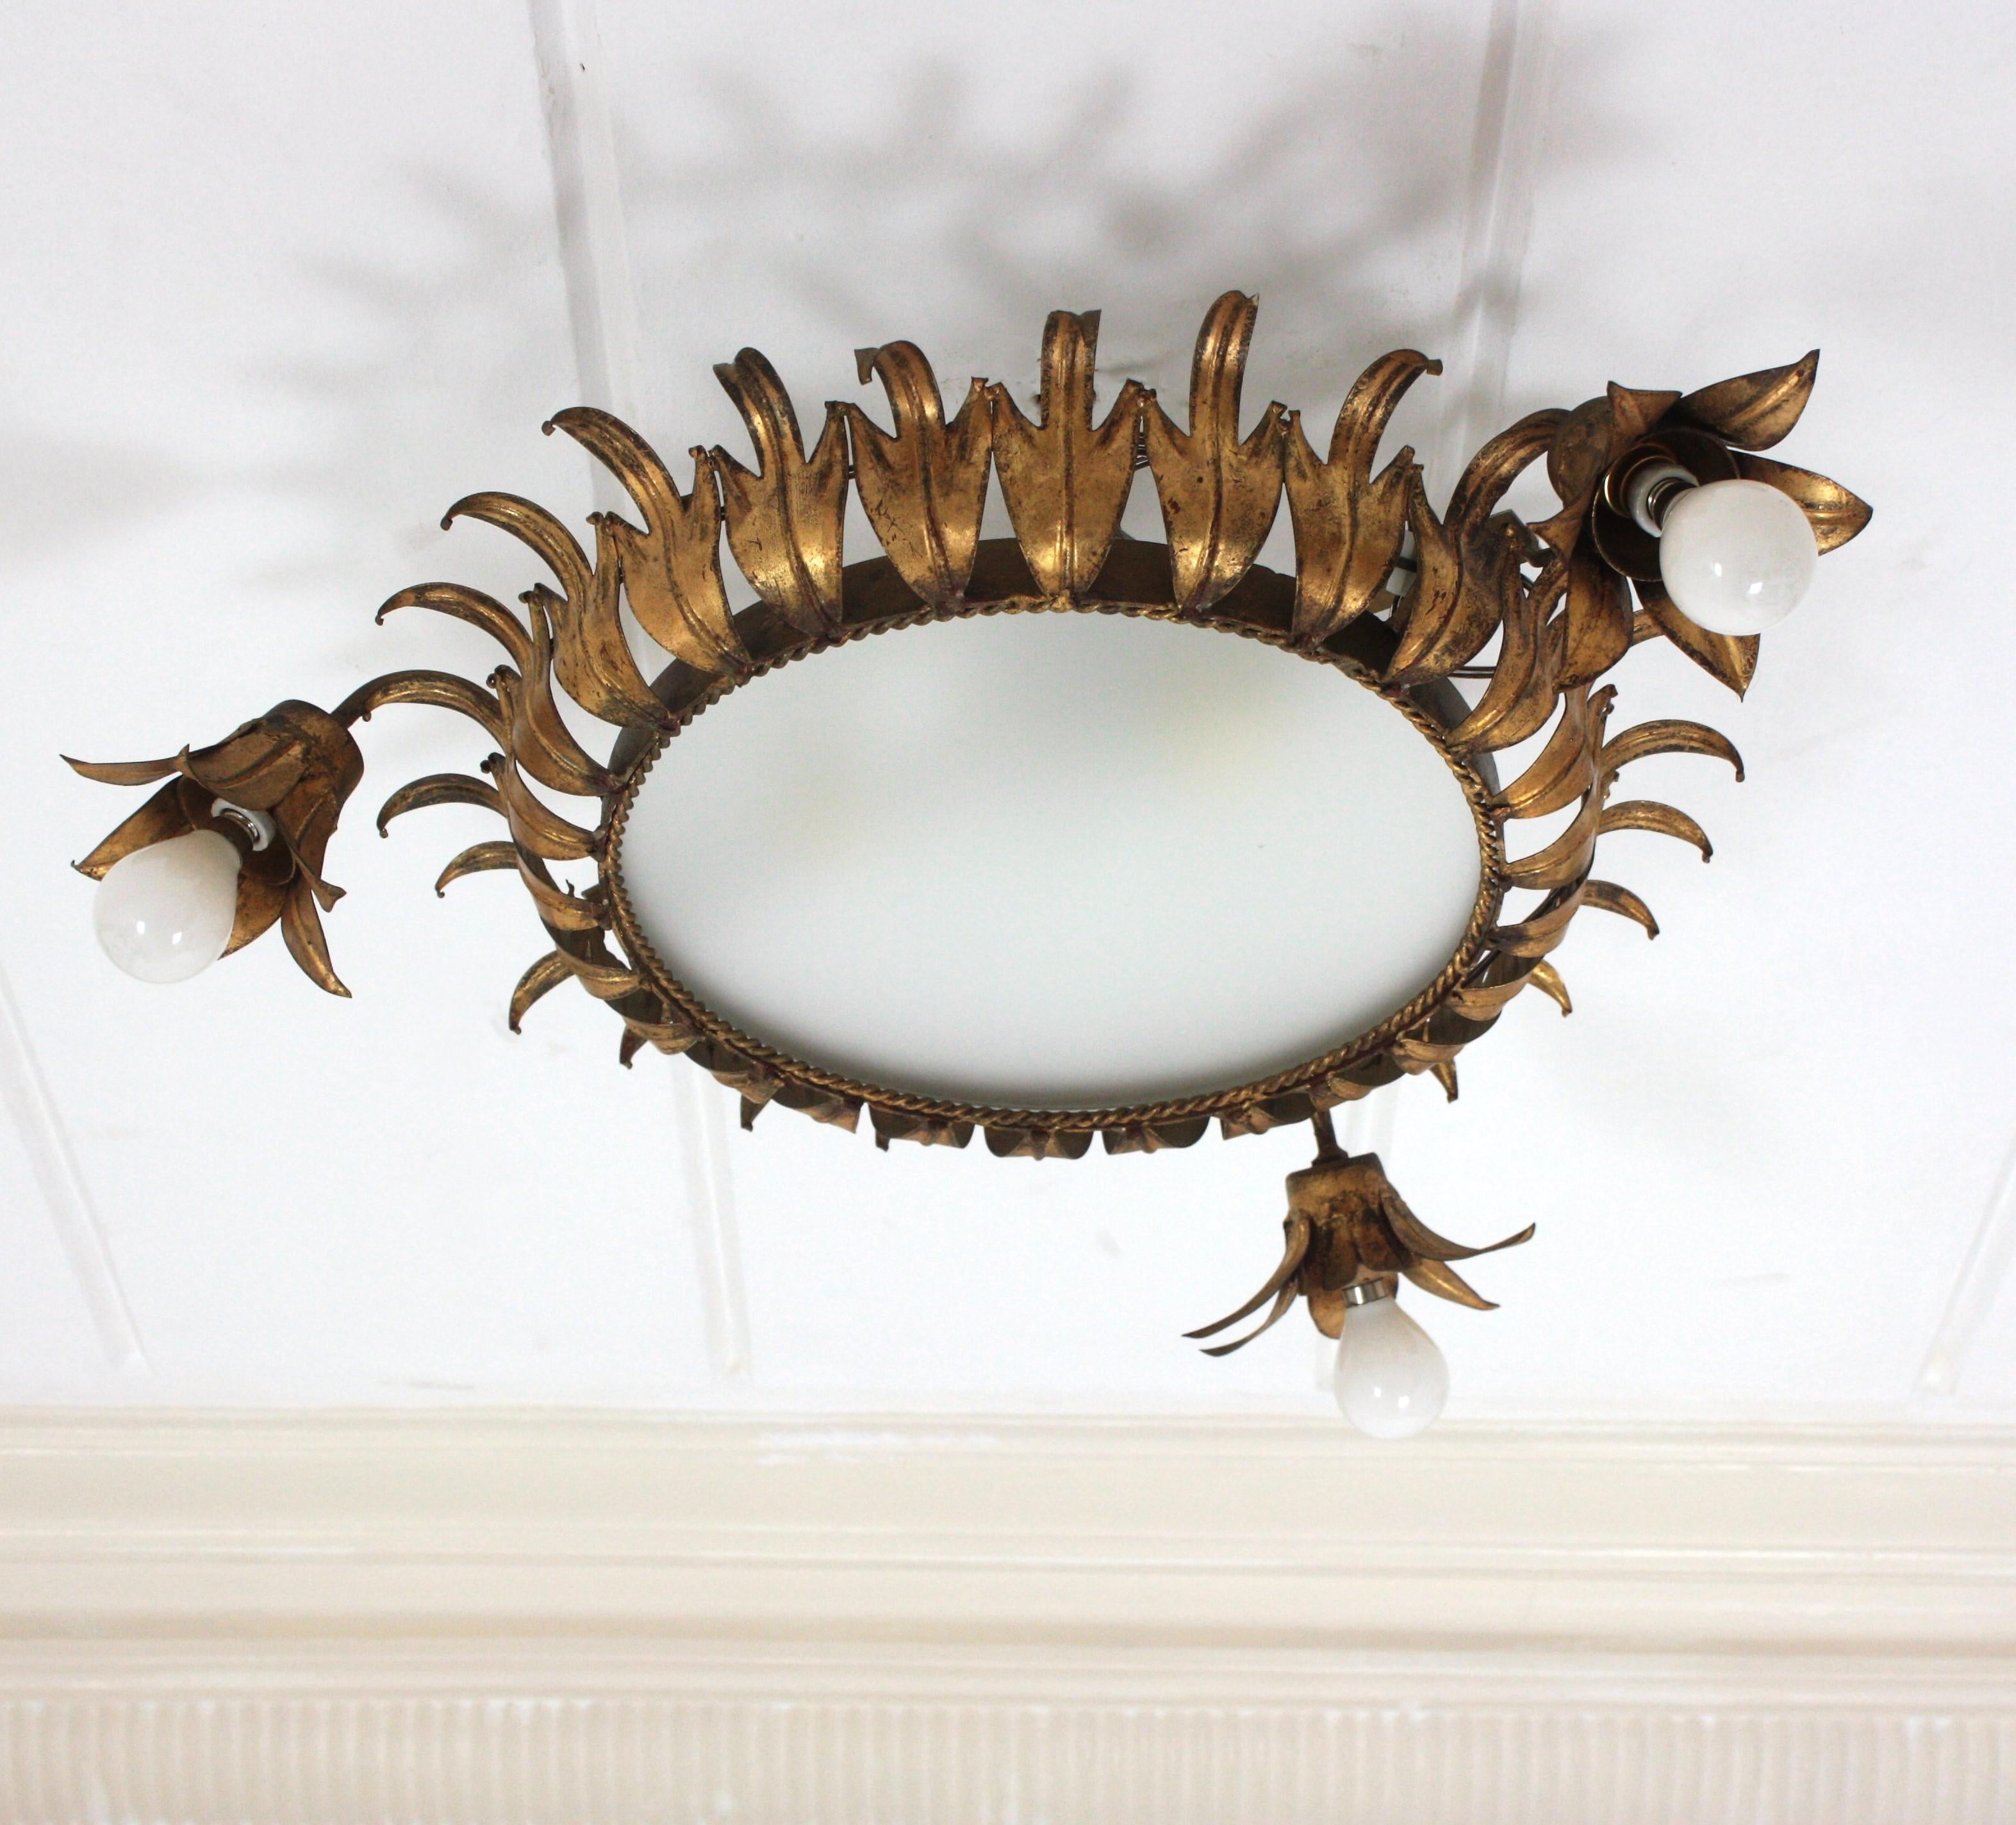 Hand-Crafted Sunburst Floral Foliage Crown Ceiling Light Fixture, Gilt Iron, Spain, 1950s For Sale